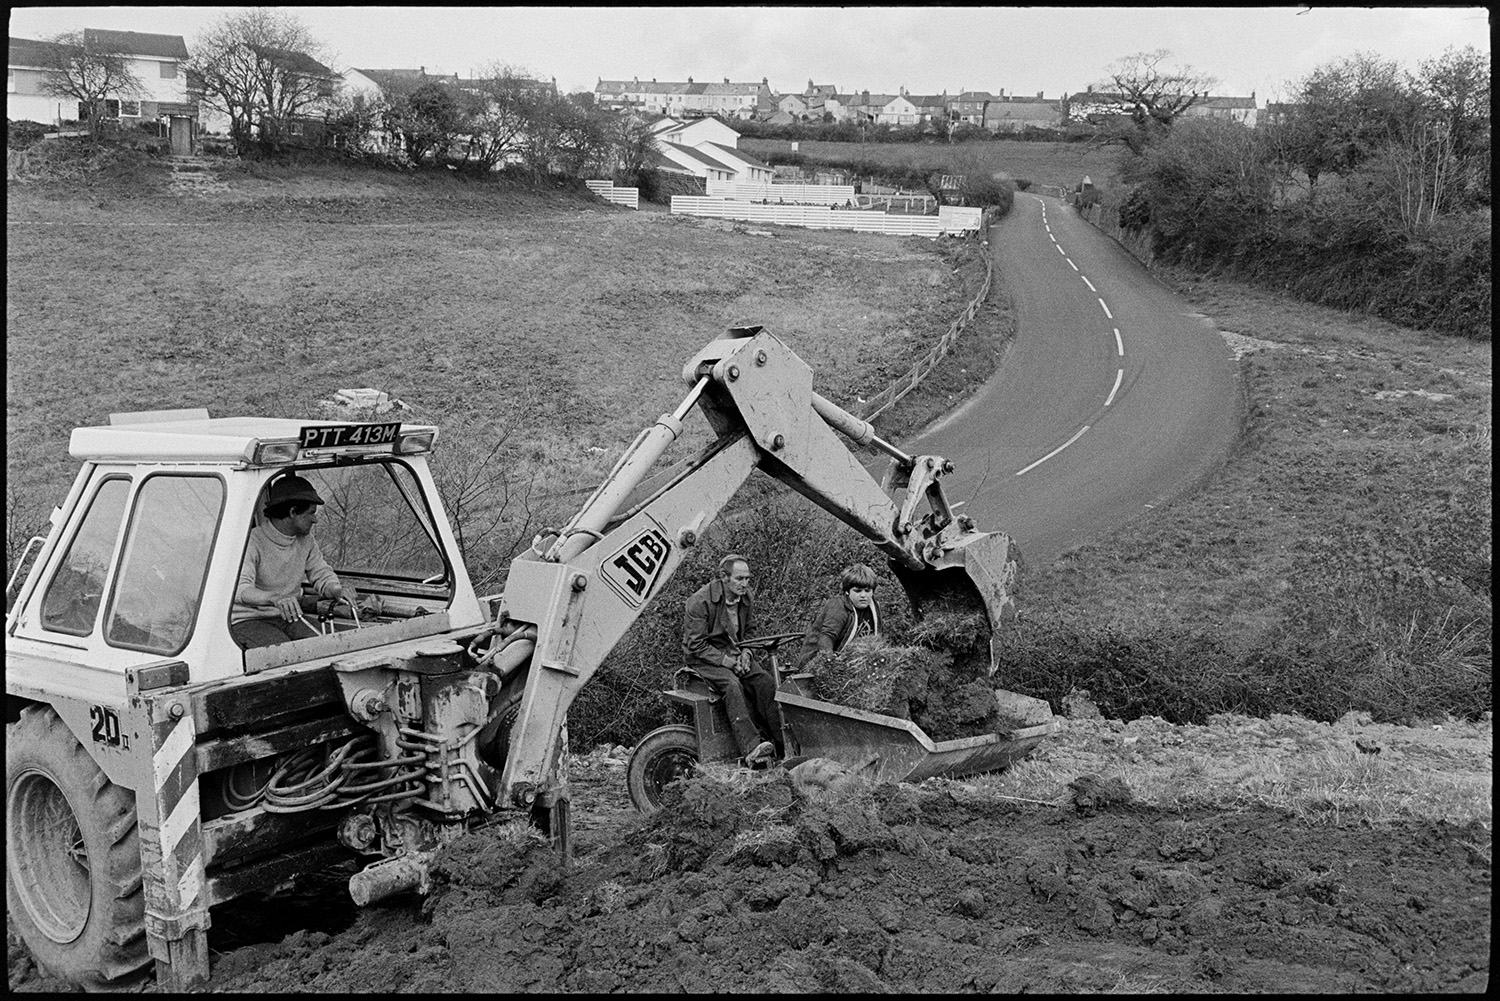 JCB and dumper truck excavating building site. 
[A JCB digger stripping topsoil from a building site in Torrington and placing it into the bucket of a dumper truck. A man and boy are sat behind the controls of the dumper truck. A road and houses can be seen in the background.]